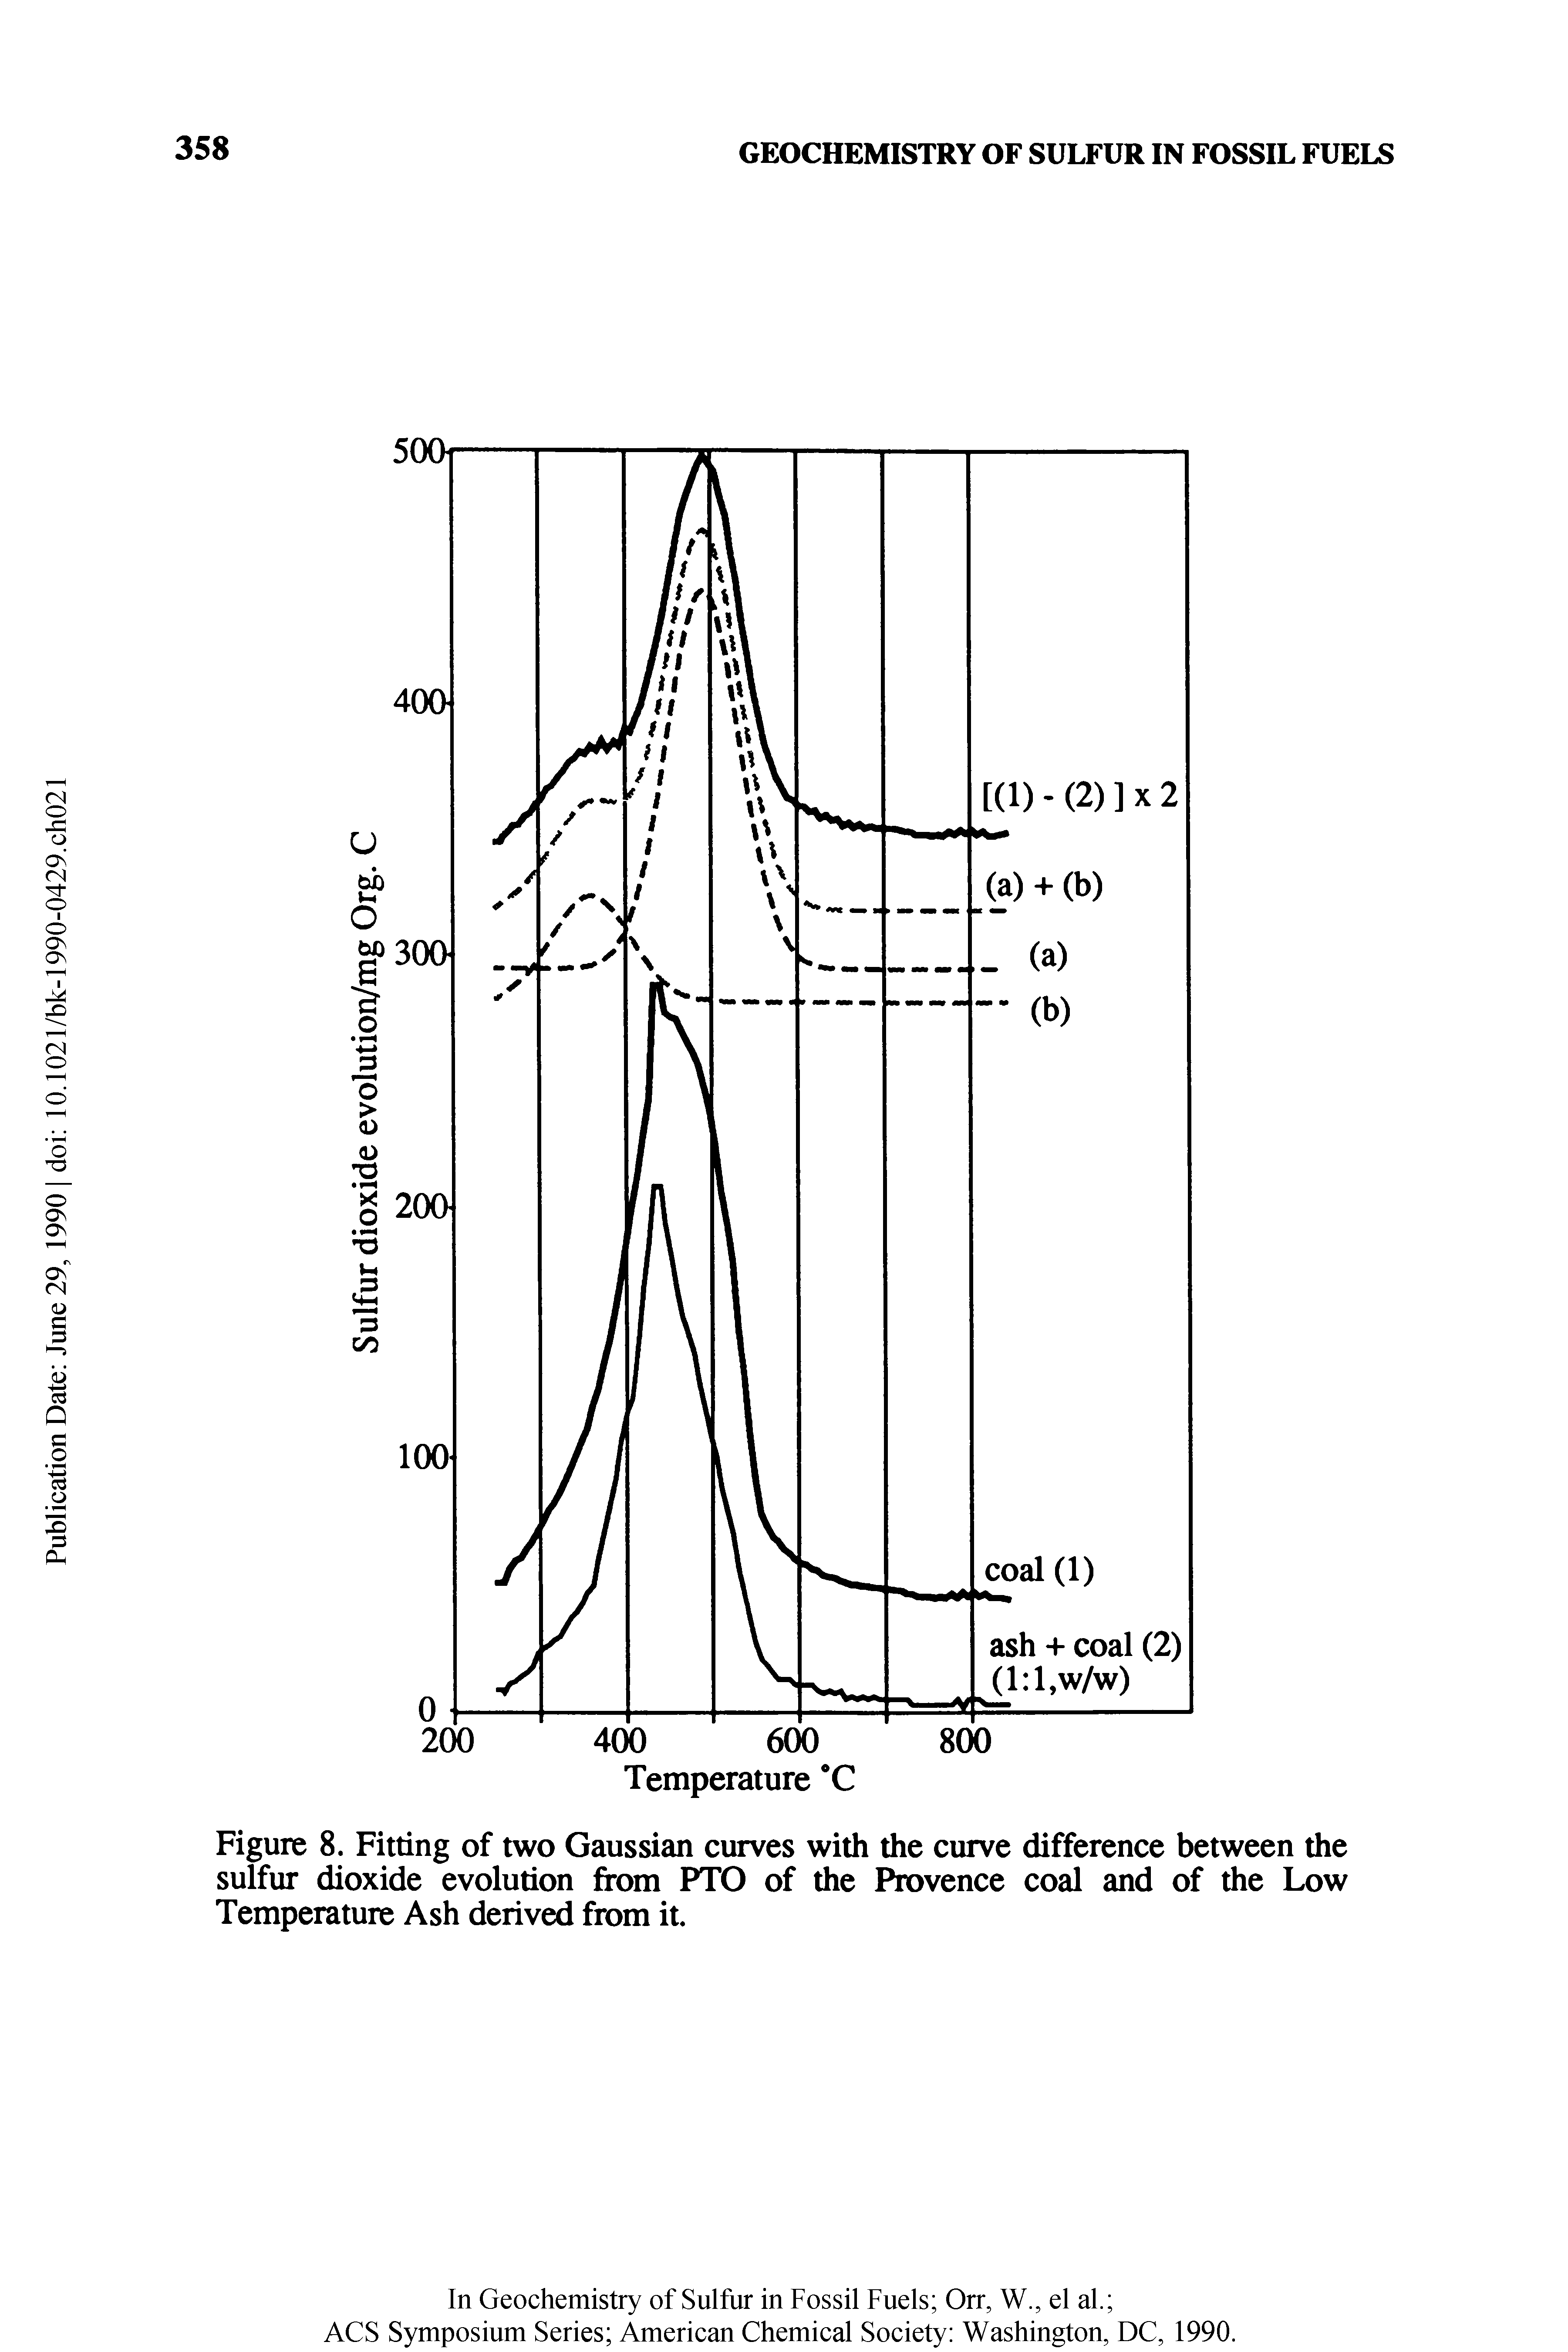 Figure 8. Fitting of two Gaussian curves with the curve difference between the sulfur dioxide evolution from PTO of the Provence coal and of the Low Temperature Ash derived from it.